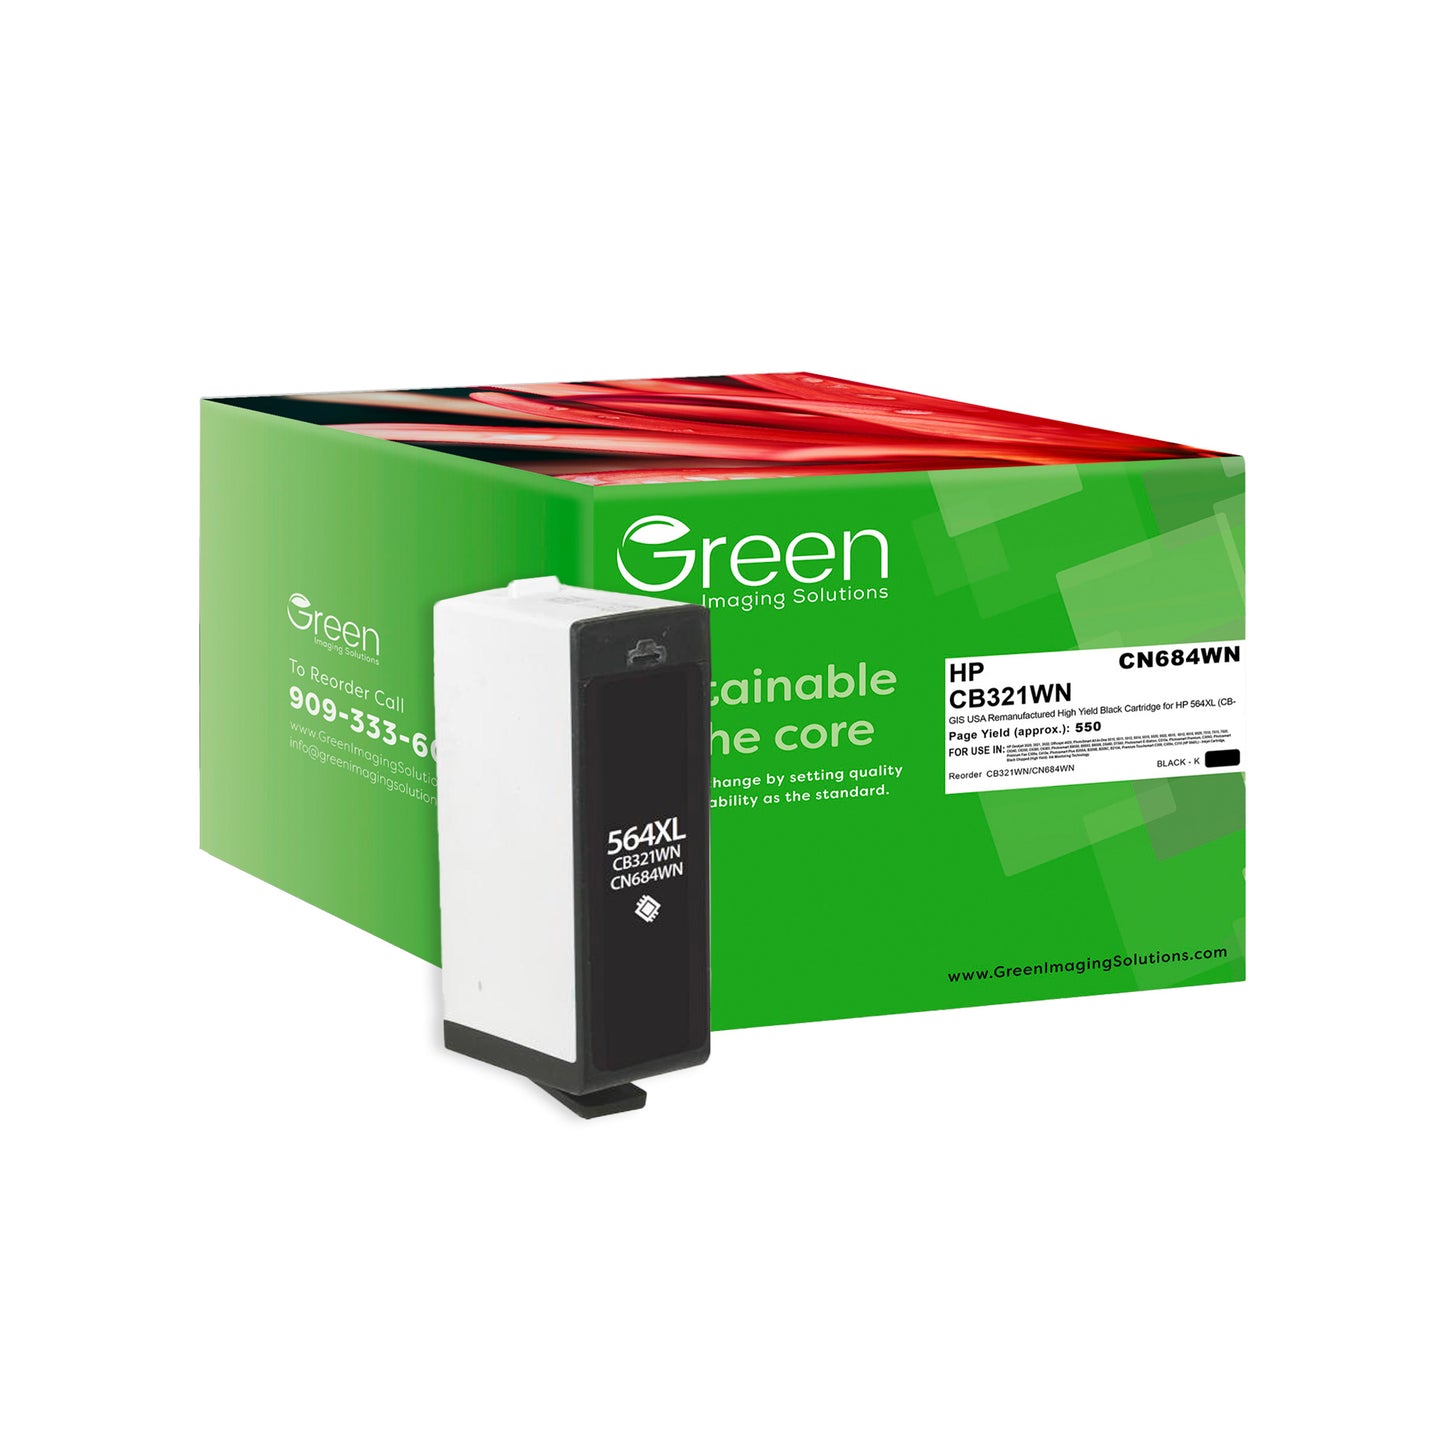 Green Imaging Solutions USA Remanufactured High Yield Black Ink Cartridge for HP 564XL (CB321WN/CN684WN)